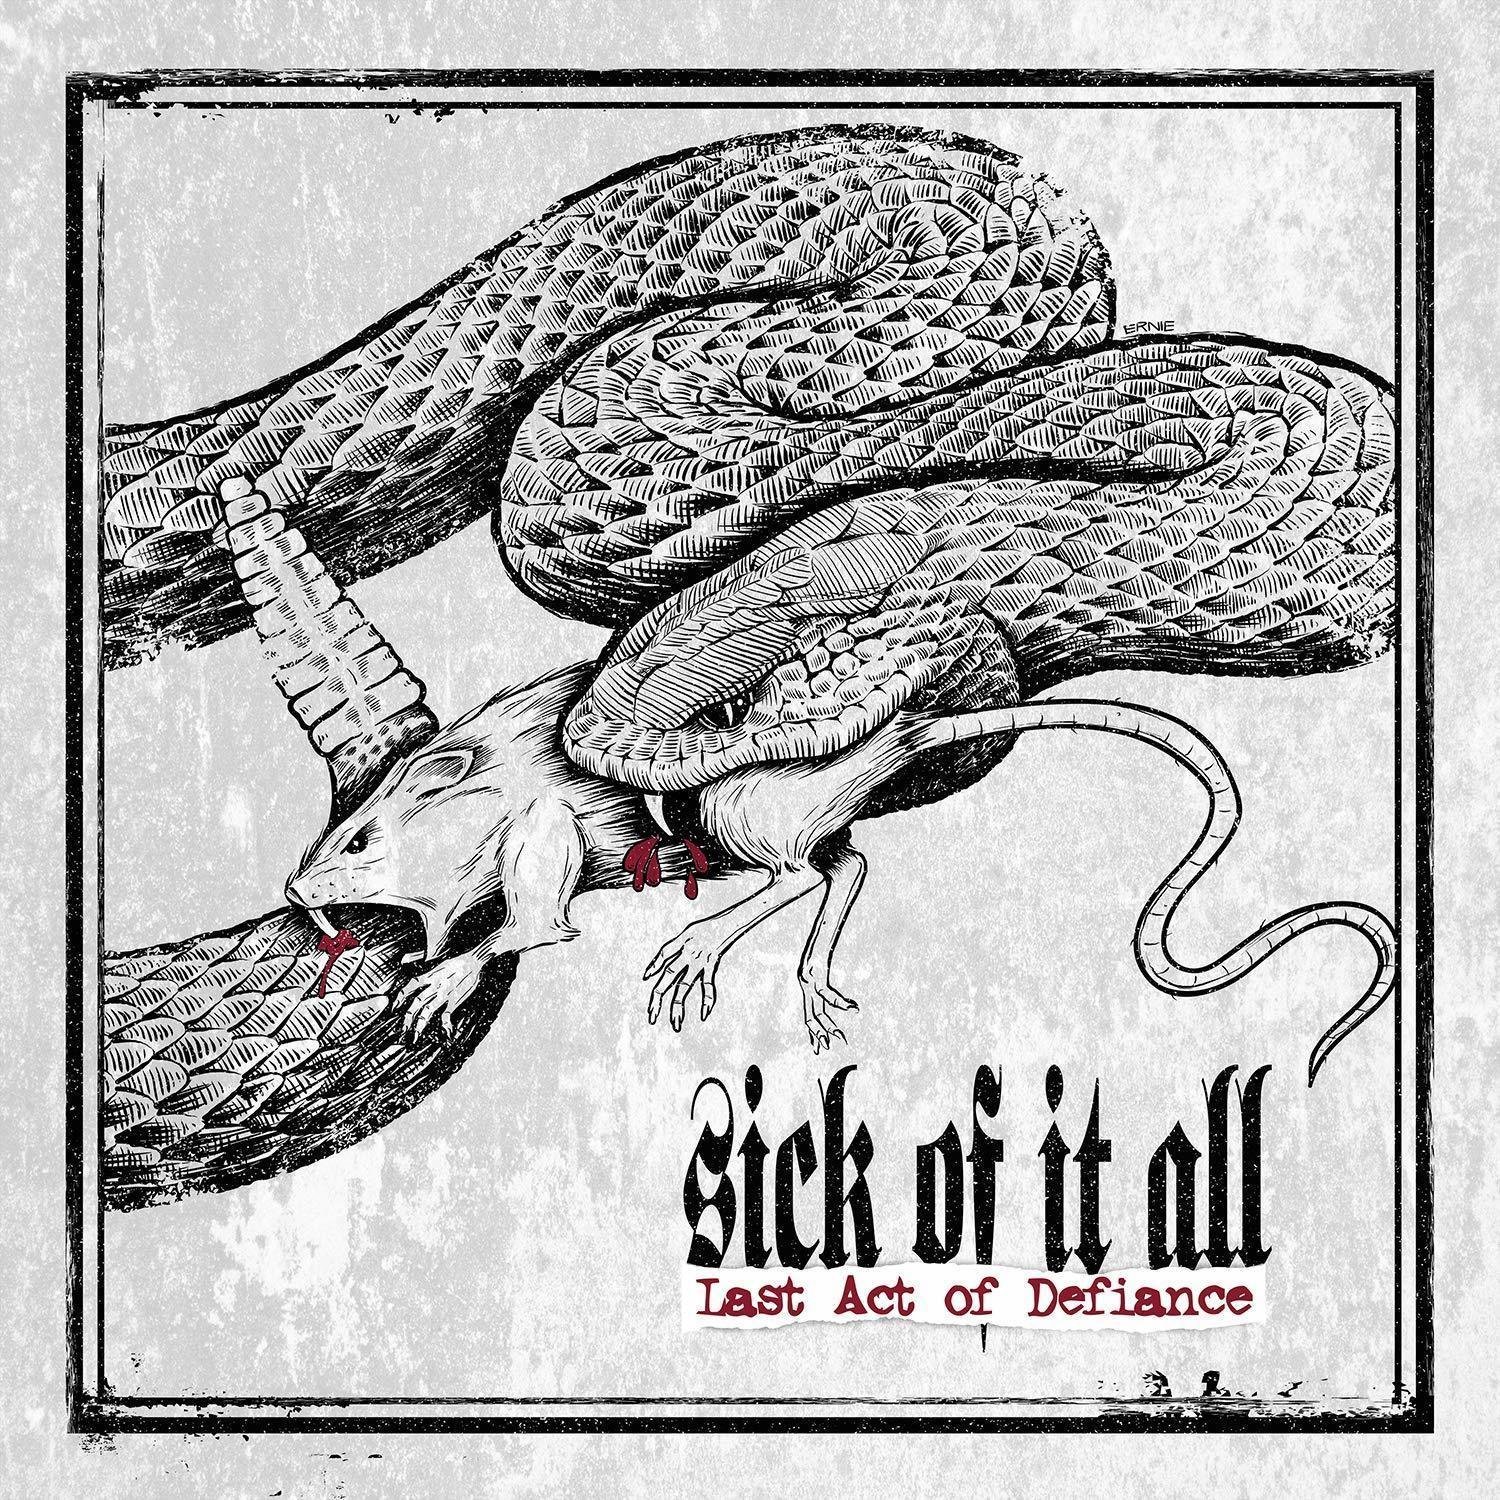 Płyta winylowa Sick Of It All - Last Act Of Defiance (Limited Edition) (Grey Coloured) (LP)